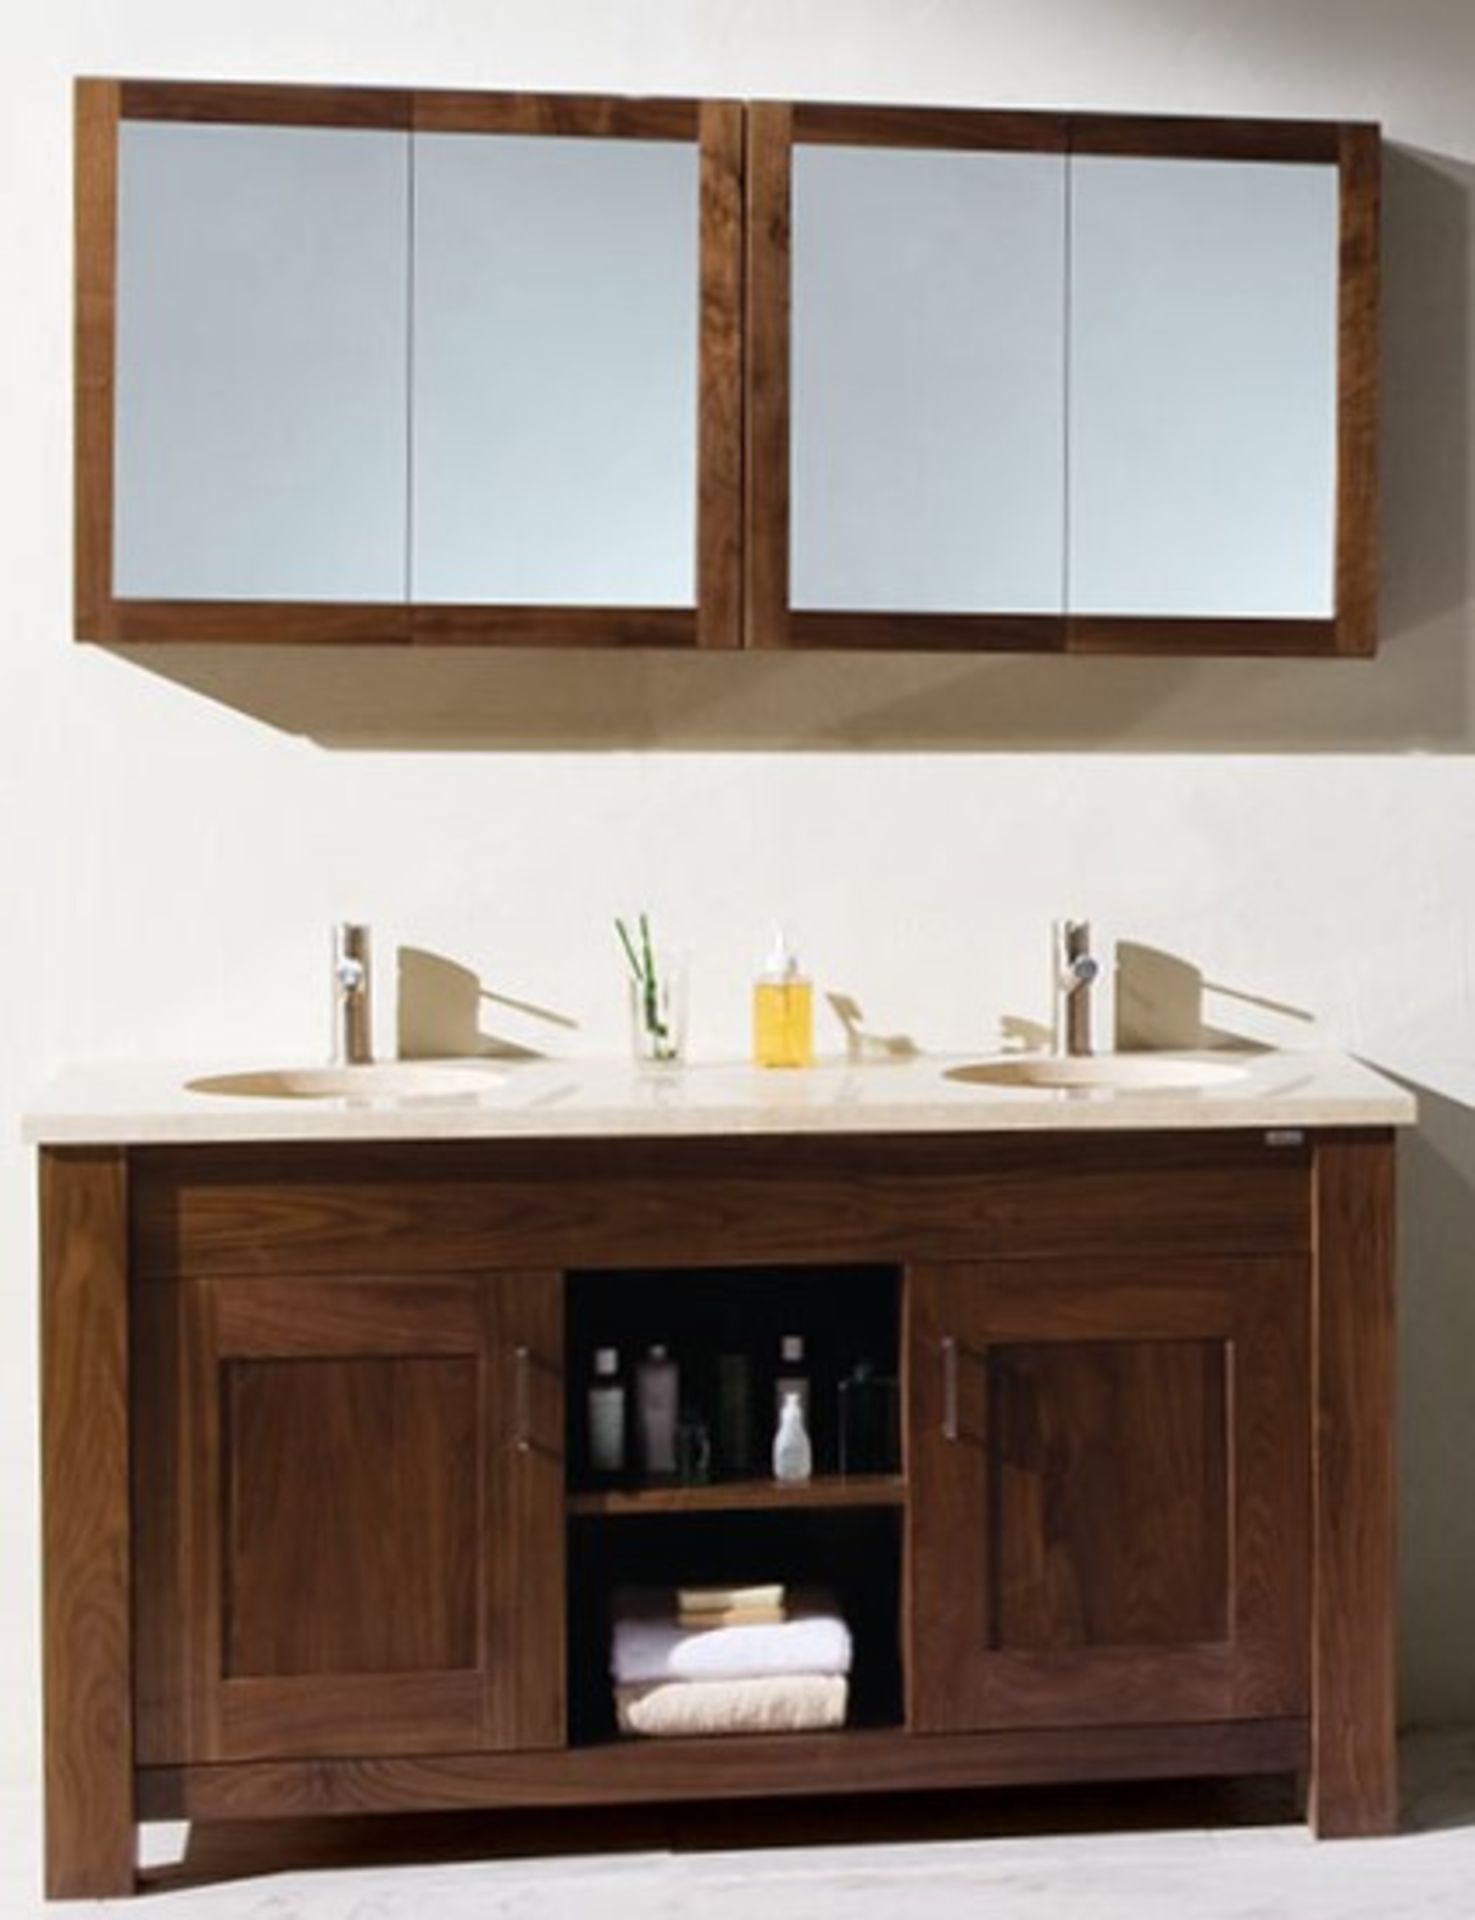 1 x Stonearth 600mm Wall Mounted Mirrored Bathroom Storage Cabinet - American Solid Walnut RRP £460 - Image 9 of 13